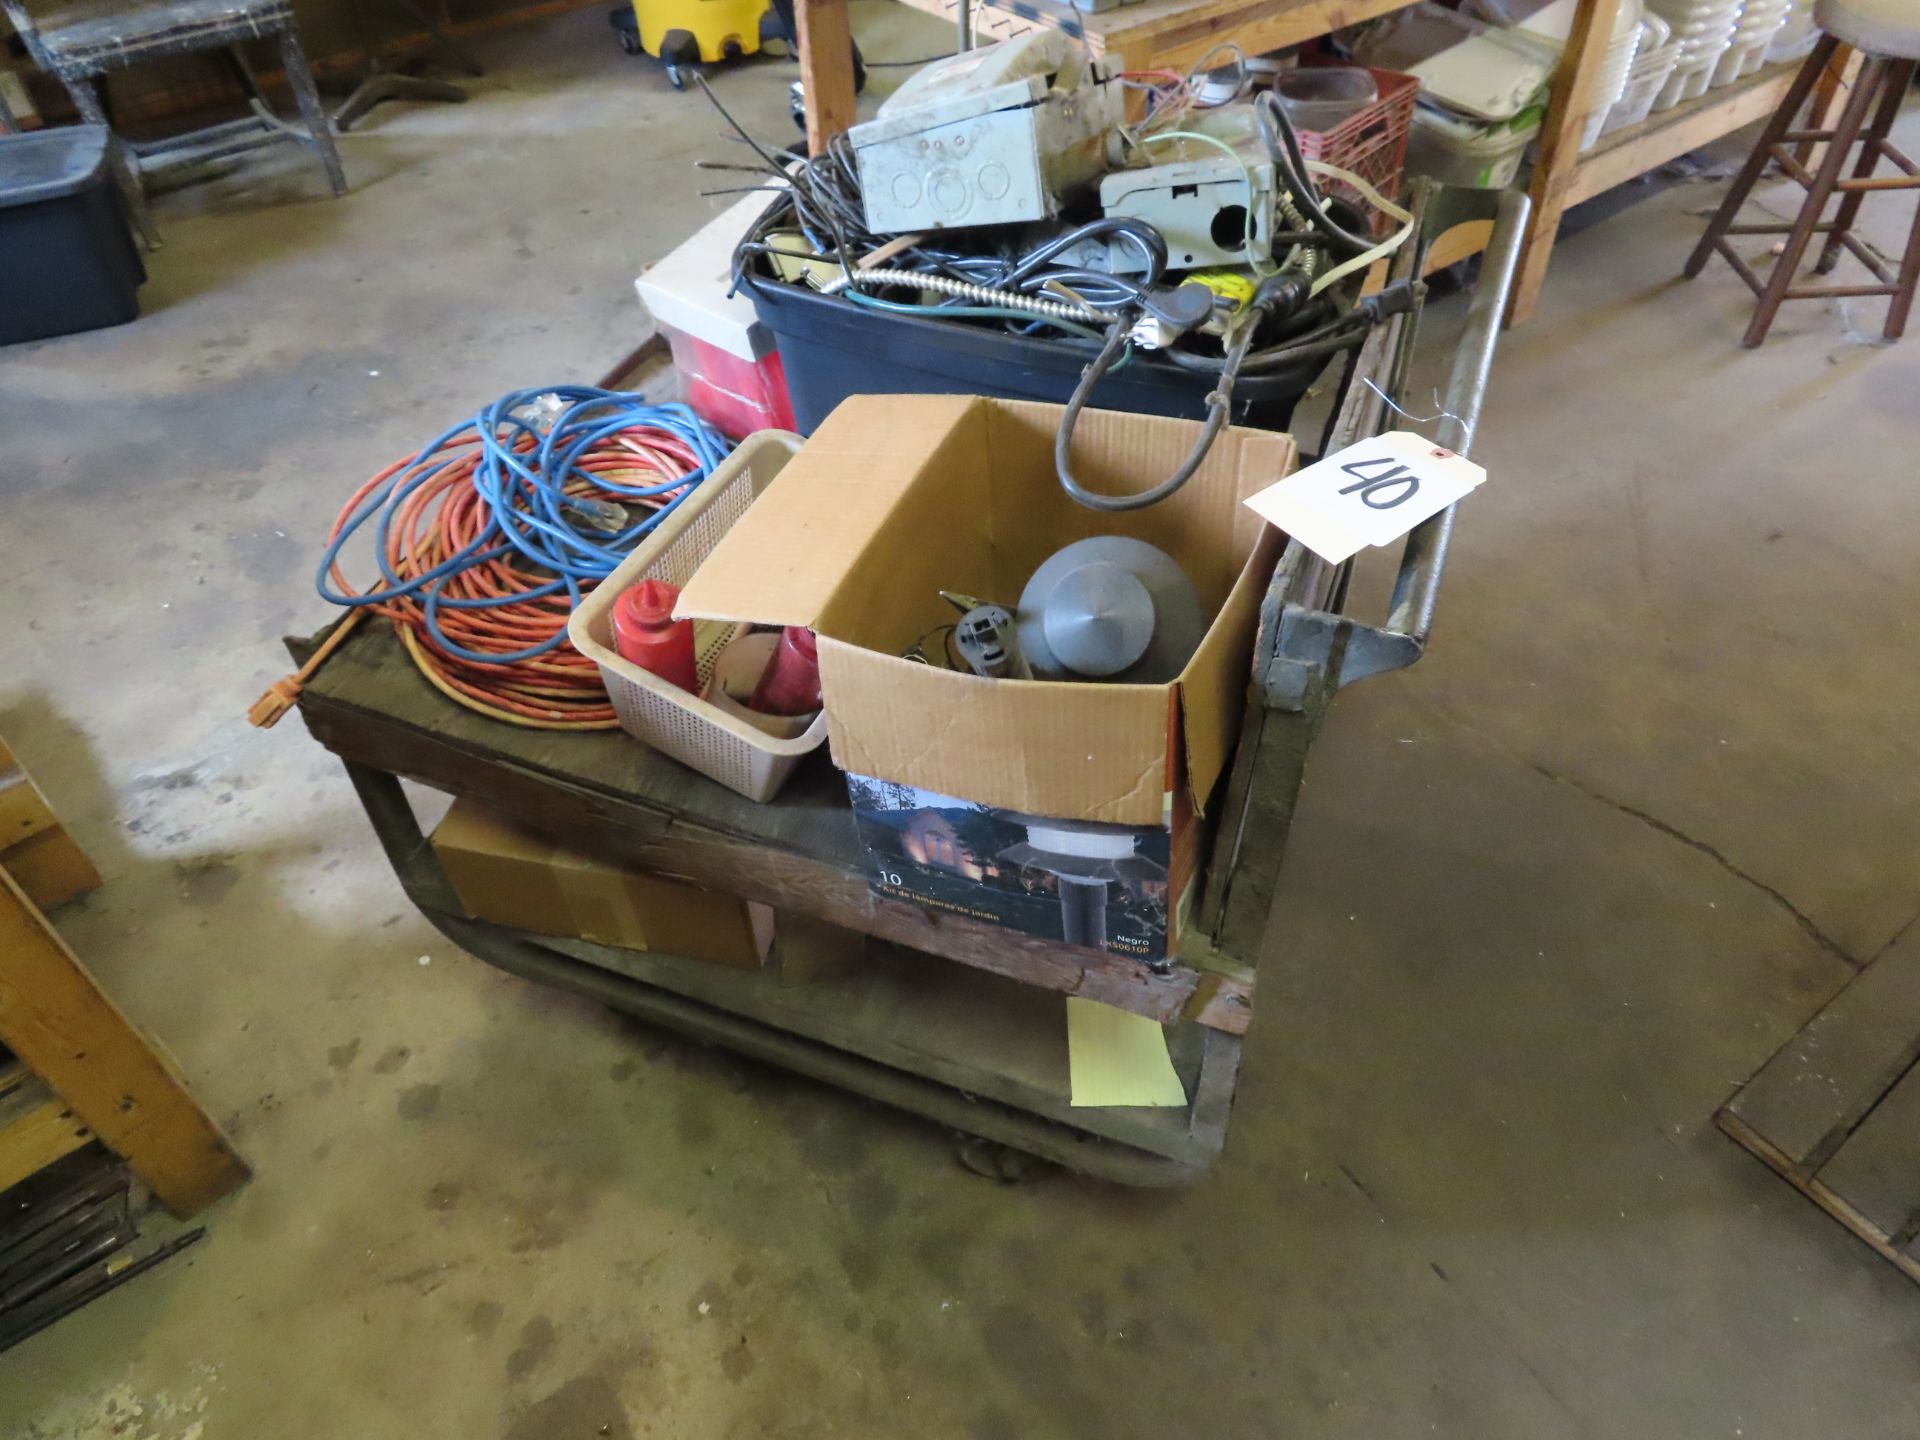 4-Wheel Shop Cart and Contents